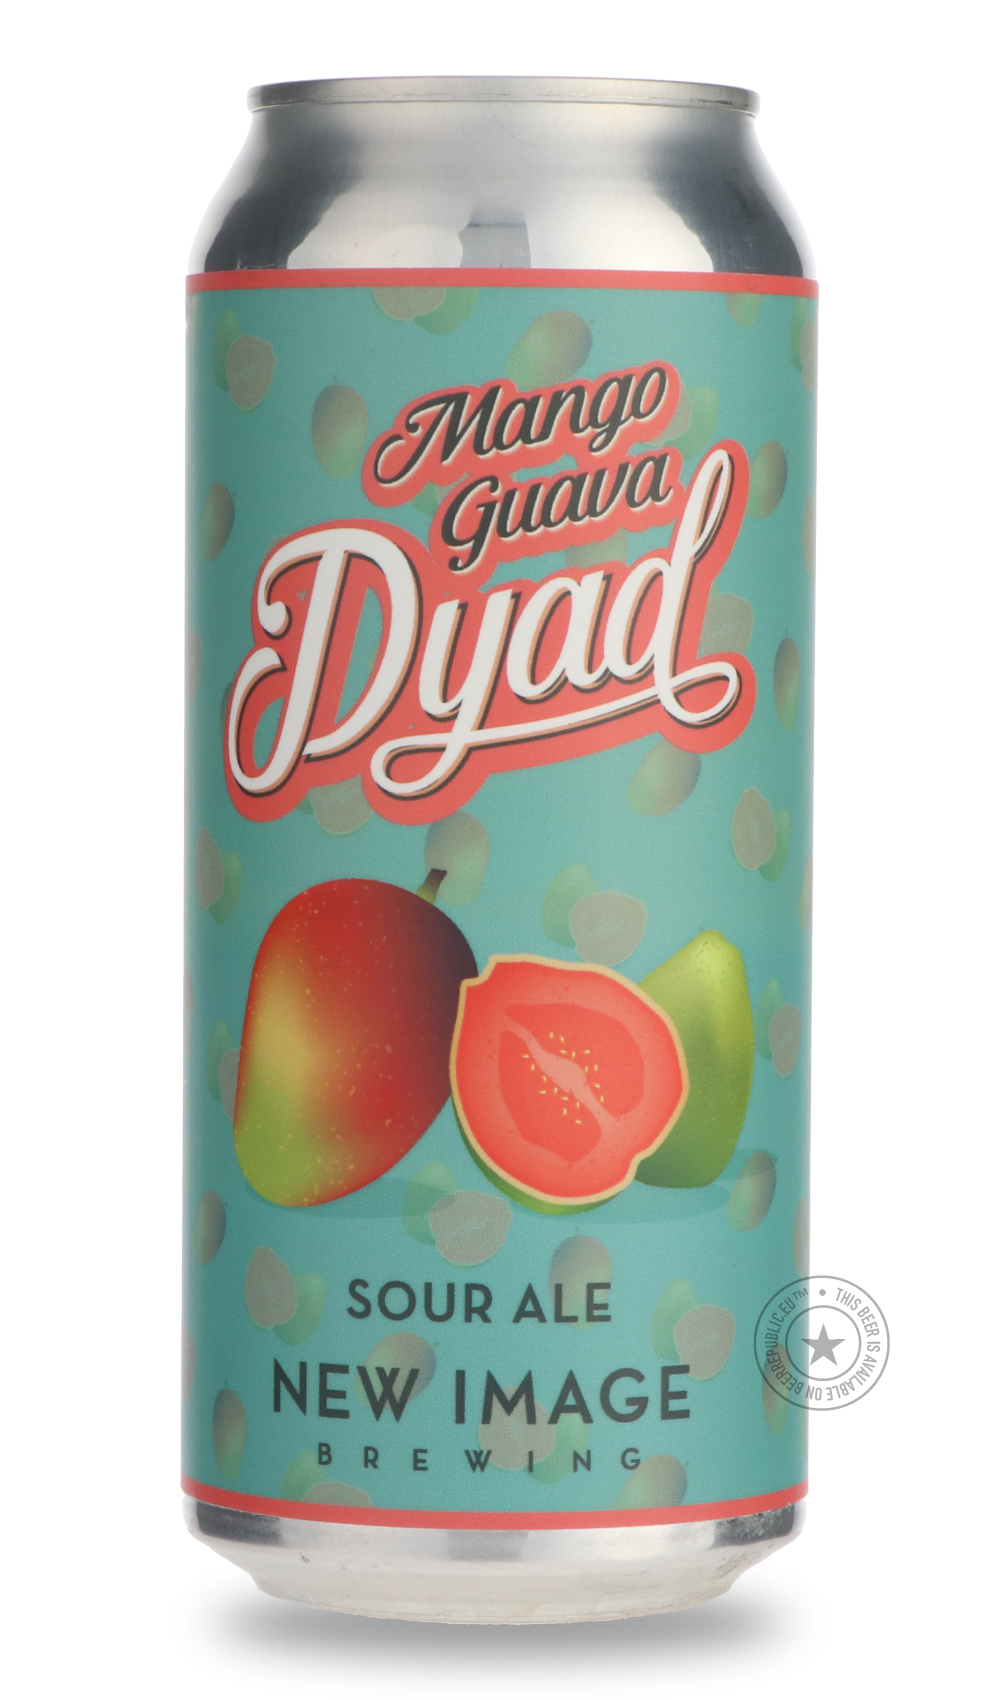 -New Image- Mango Guava Dyad-Sour / Wild & Fruity- Only @ Beer Republic - The best online beer store for American & Canadian craft beer - Buy beer online from the USA and Canada - Bier online kopen - Amerikaans bier kopen - Craft beer store - Craft beer kopen - Amerikanisch bier kaufen - Bier online kaufen - Acheter biere online - IPA - Stout - Porter - New England IPA - Hazy IPA - Imperial Stout - Barrel Aged - Barrel Aged Imperial Stout - Brown - Dark beer - Blond - Blonde - Pilsner - Lager - Wheat - Weiz